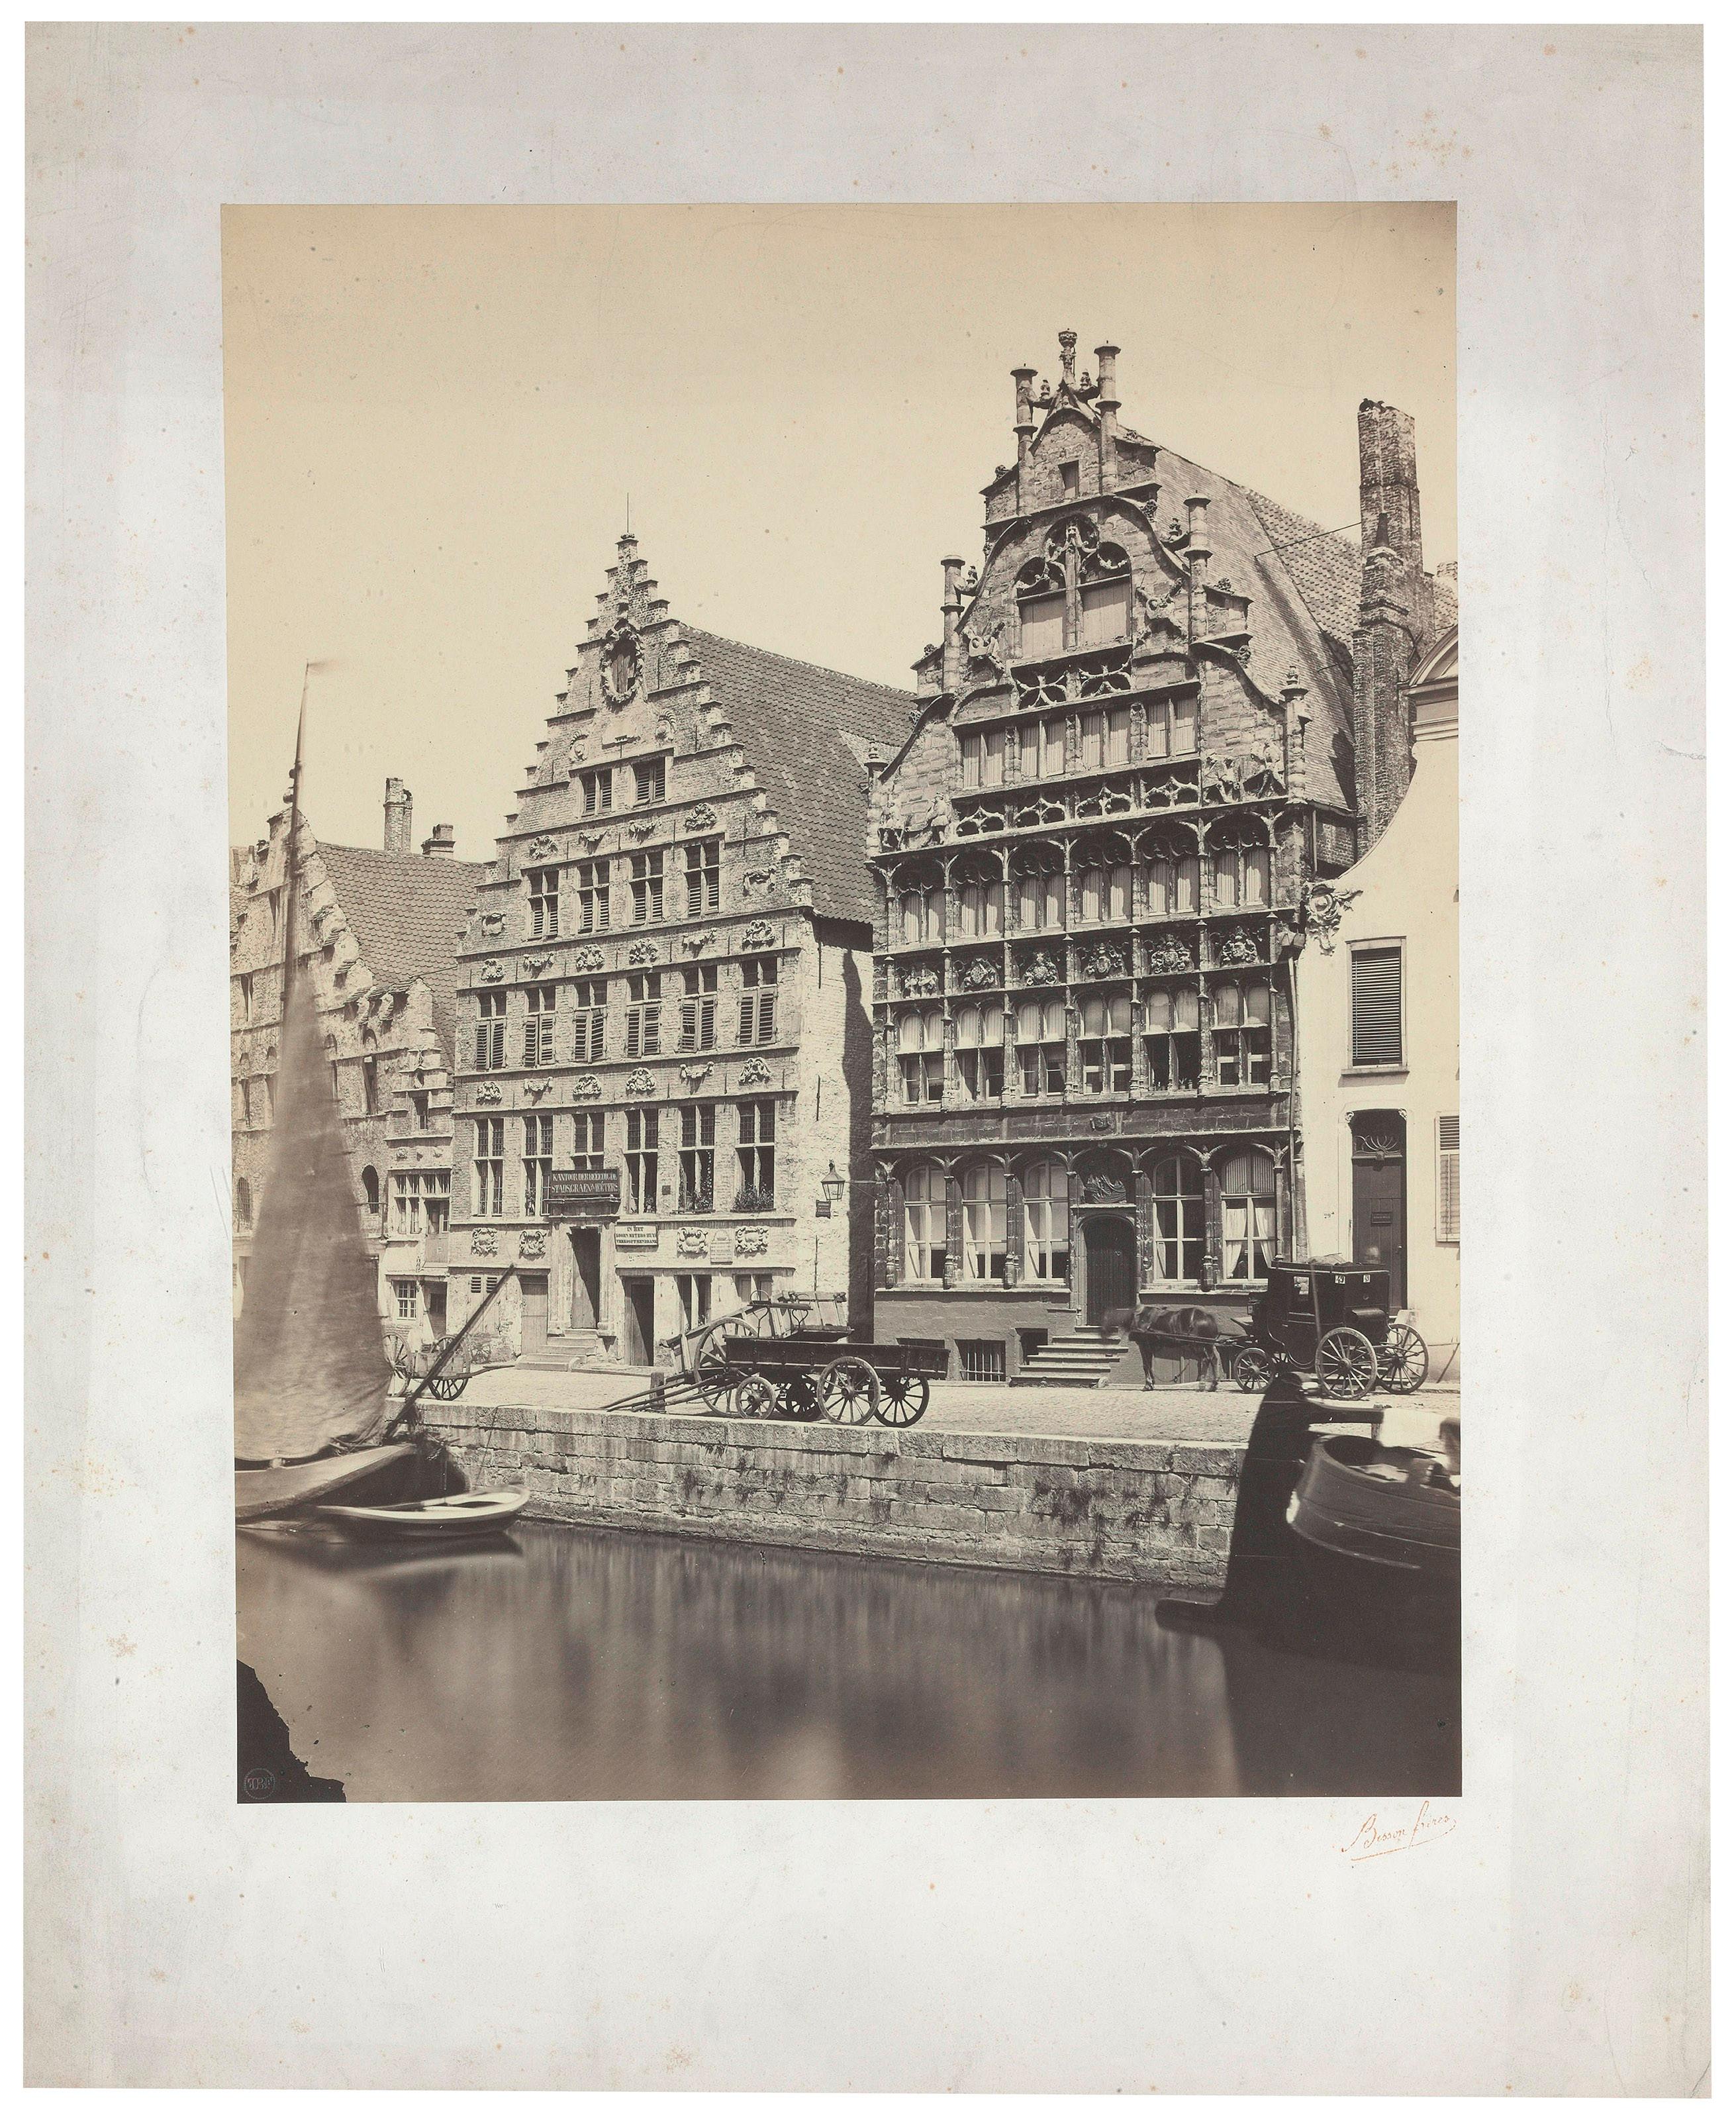 Bisson Frères Landscape Photograph - Architectural Images, Canal and Houses in Belgium, Europe, 1860s